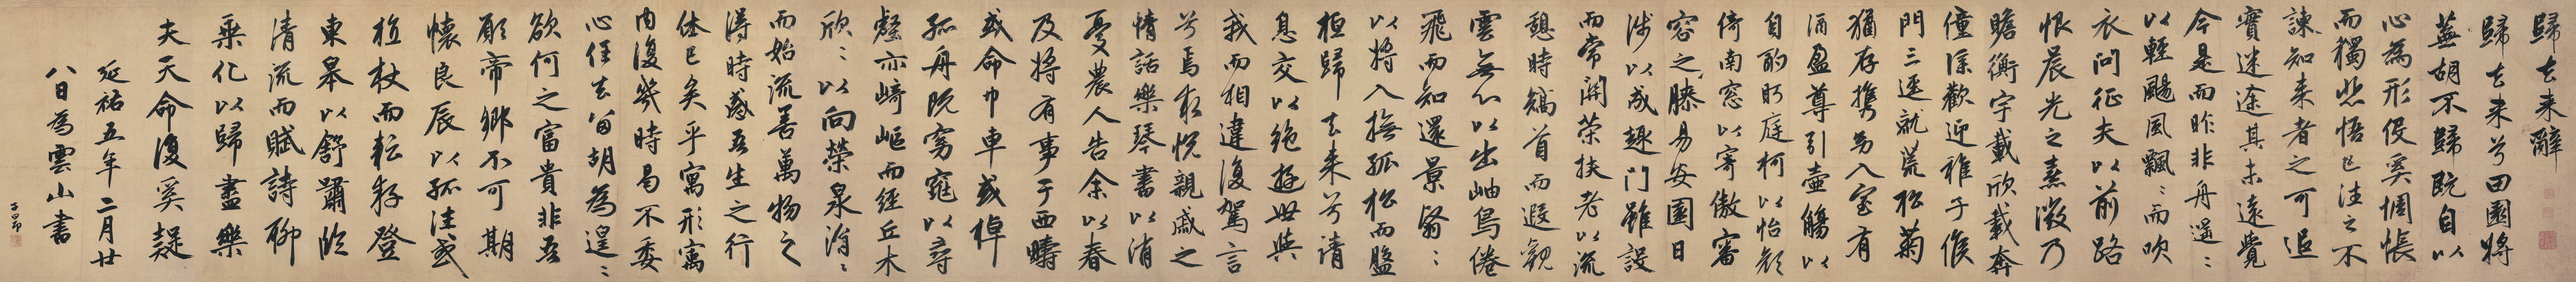 Chinese Characters Text Calligraphy Chinese 14538x1594